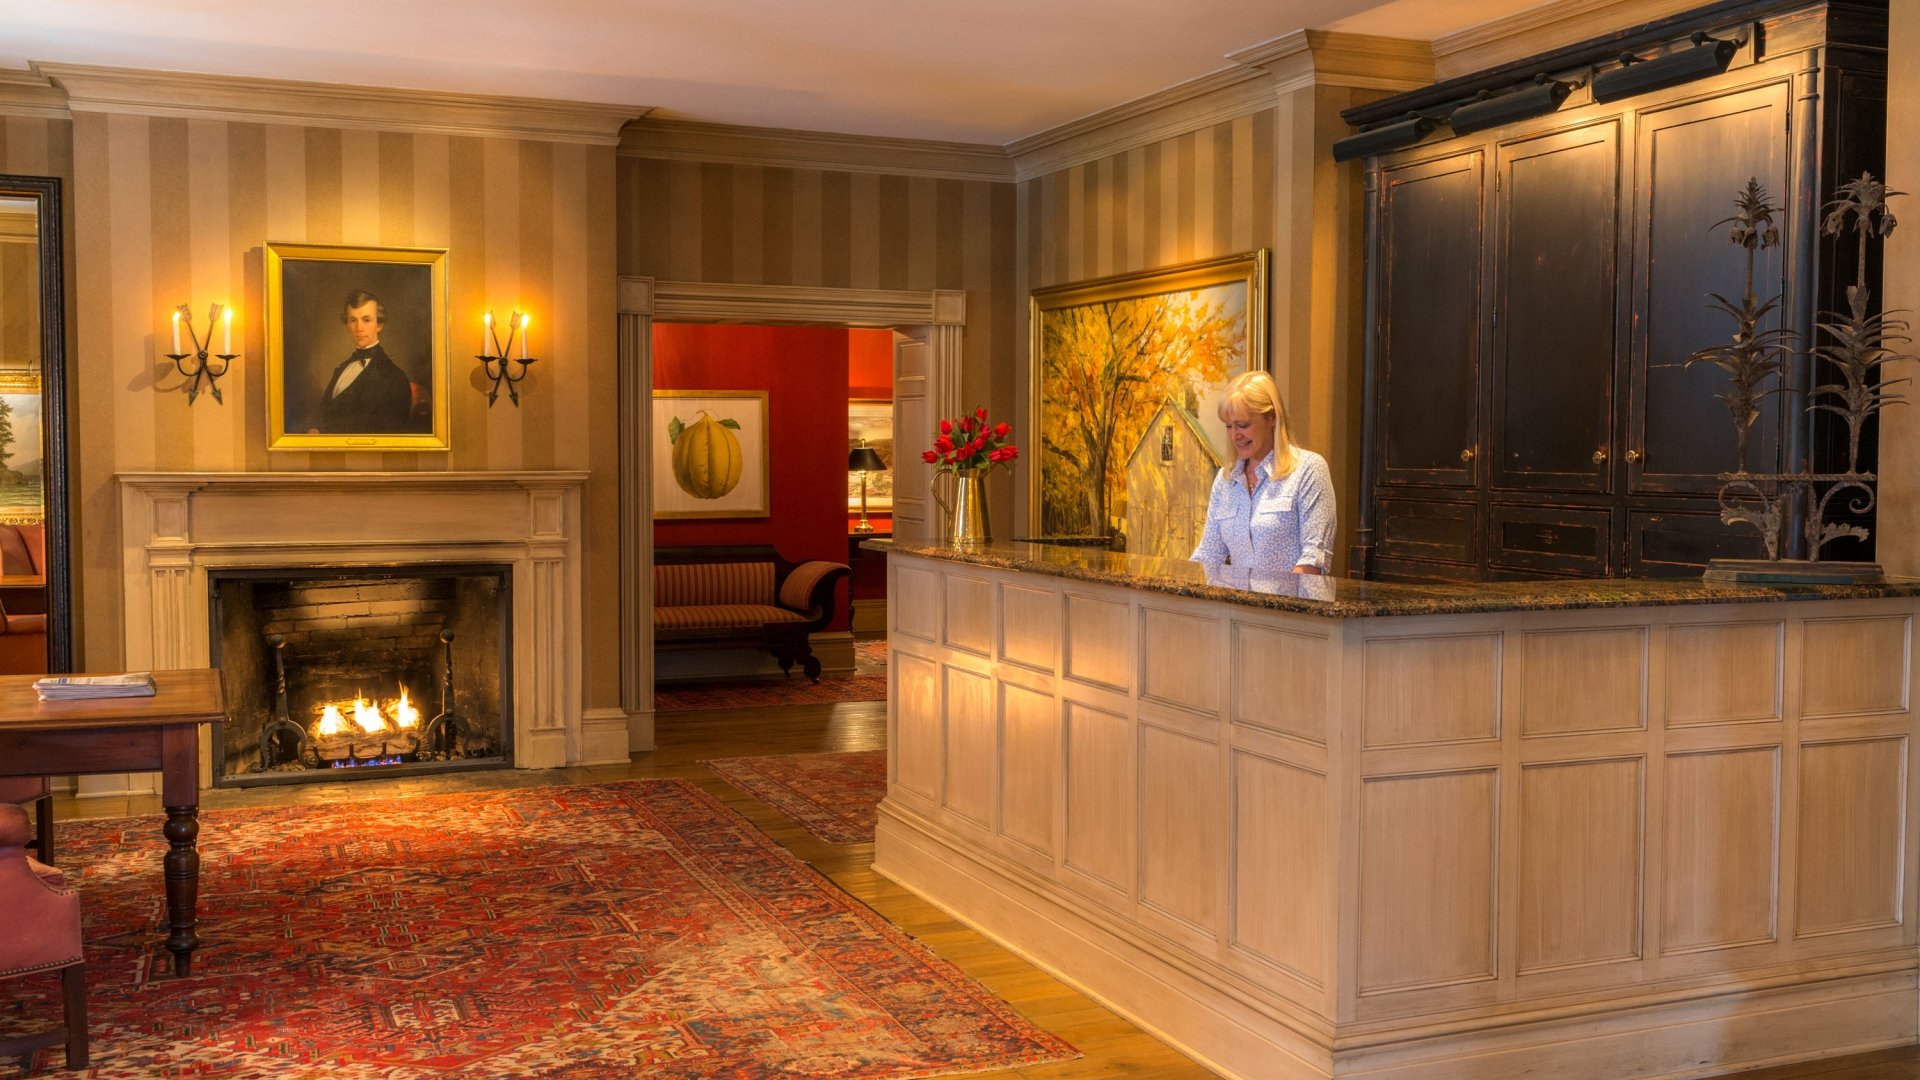 Employee working at the front desk at Inns of Aurora.